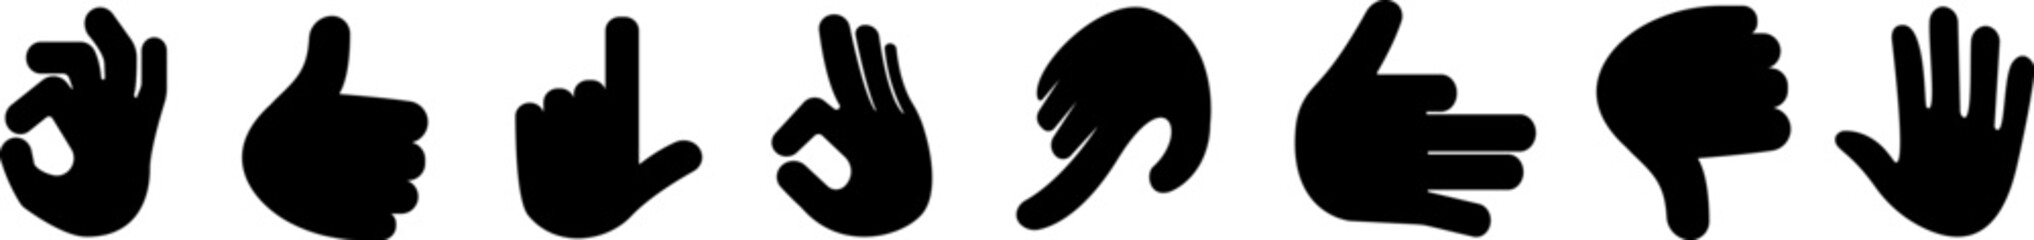 Collection of hand gestures on white background. Thumbs up and thumbs down icons. Confirmation mark